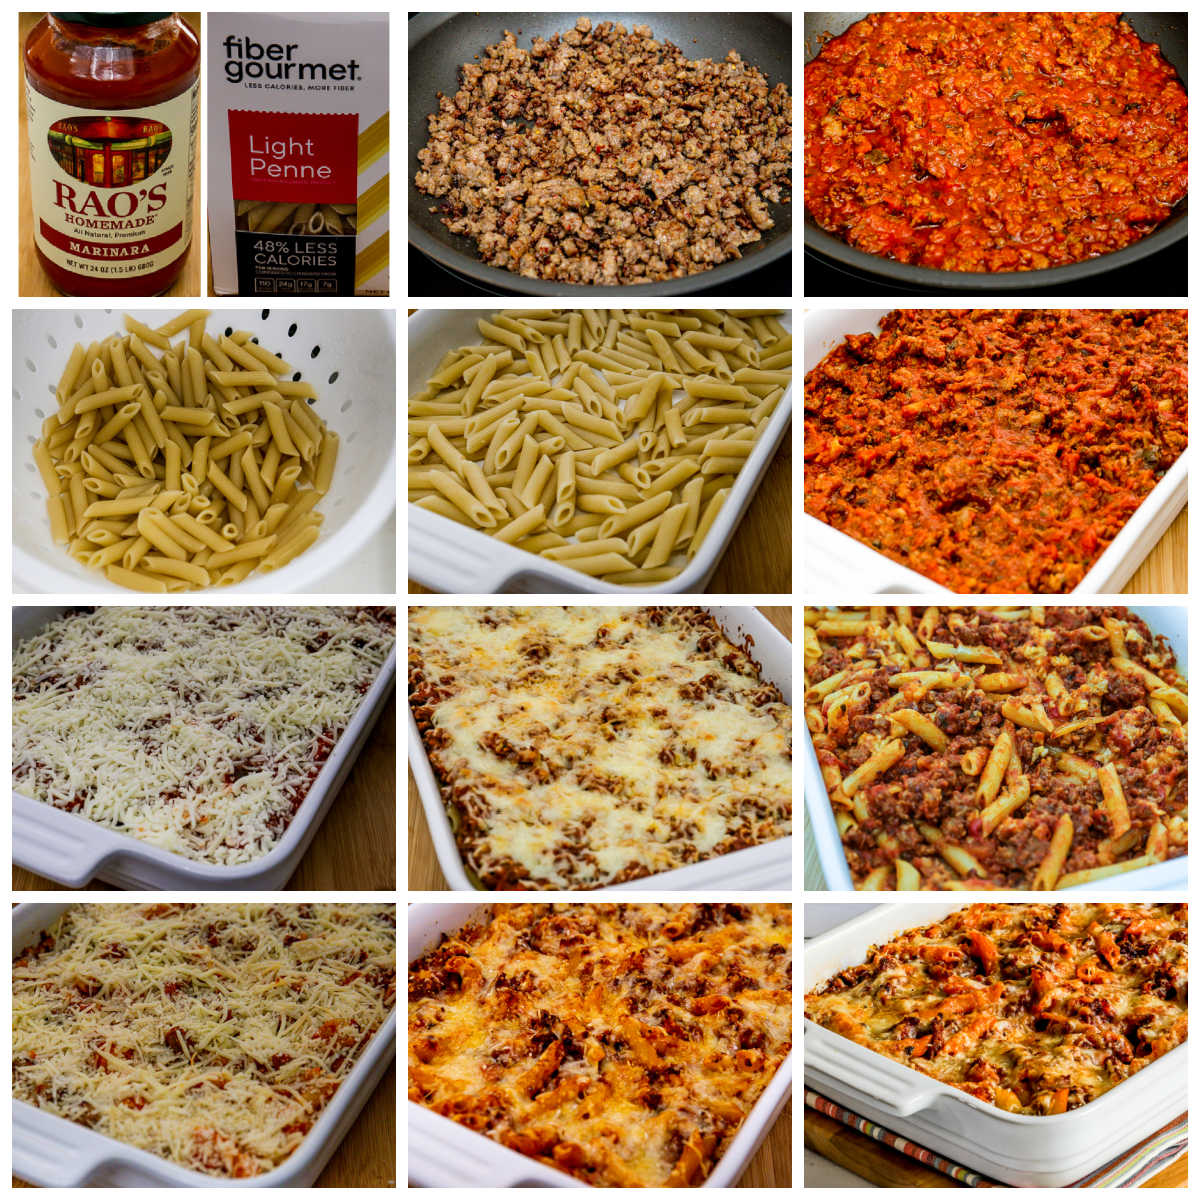 Baked Penne with Sausage Recipe Steps Collage